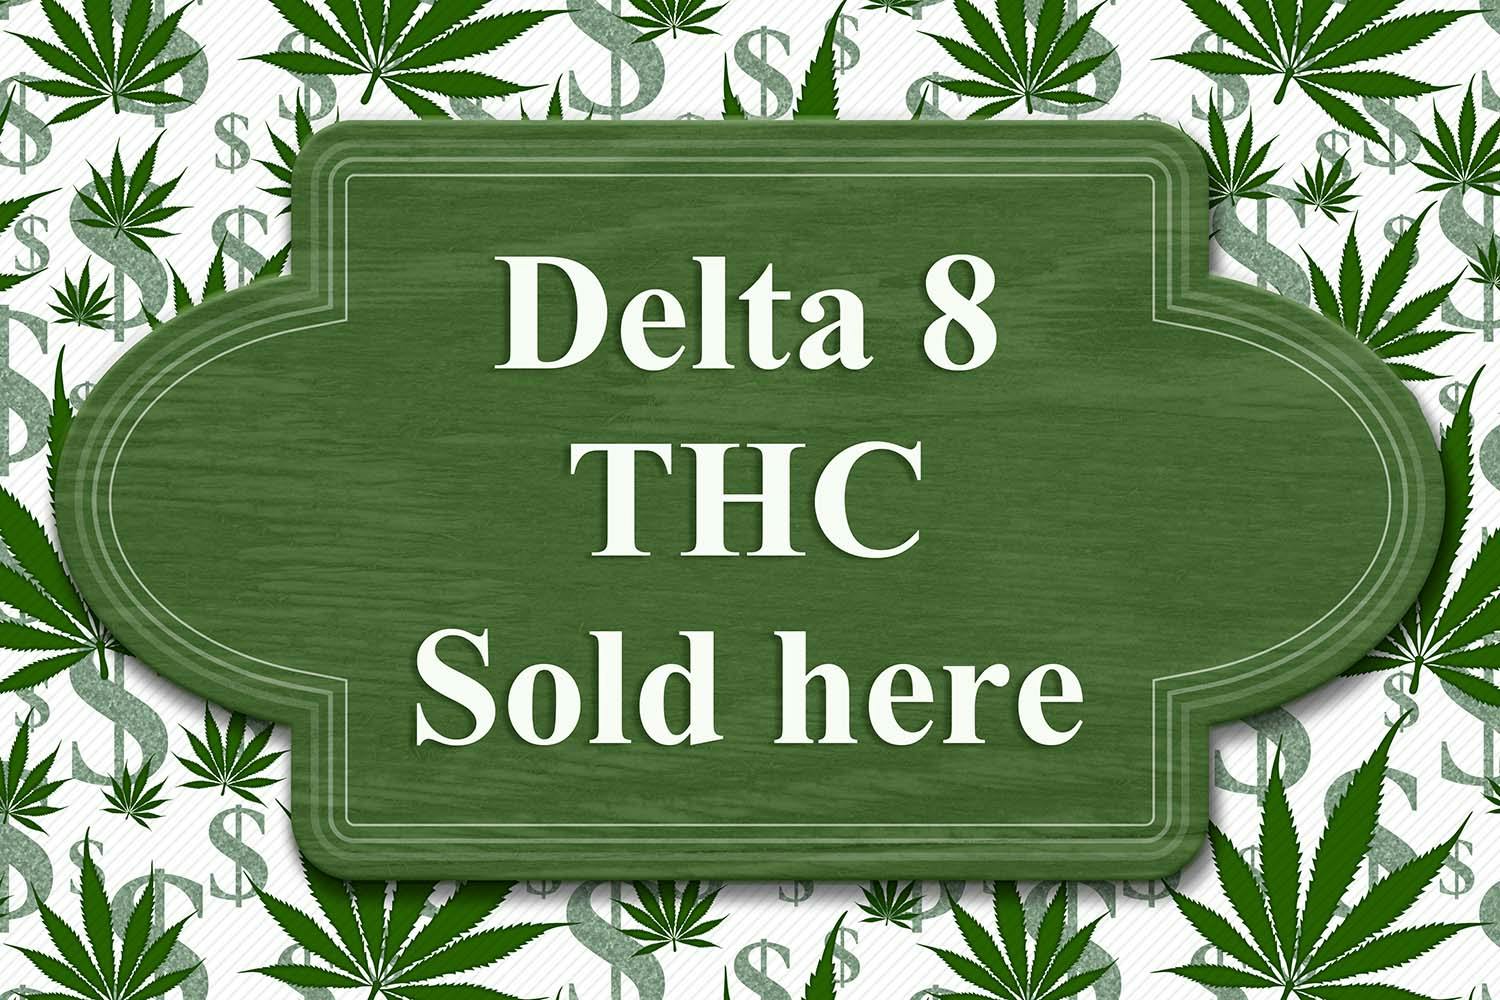 Delta-8 THC for sale sign